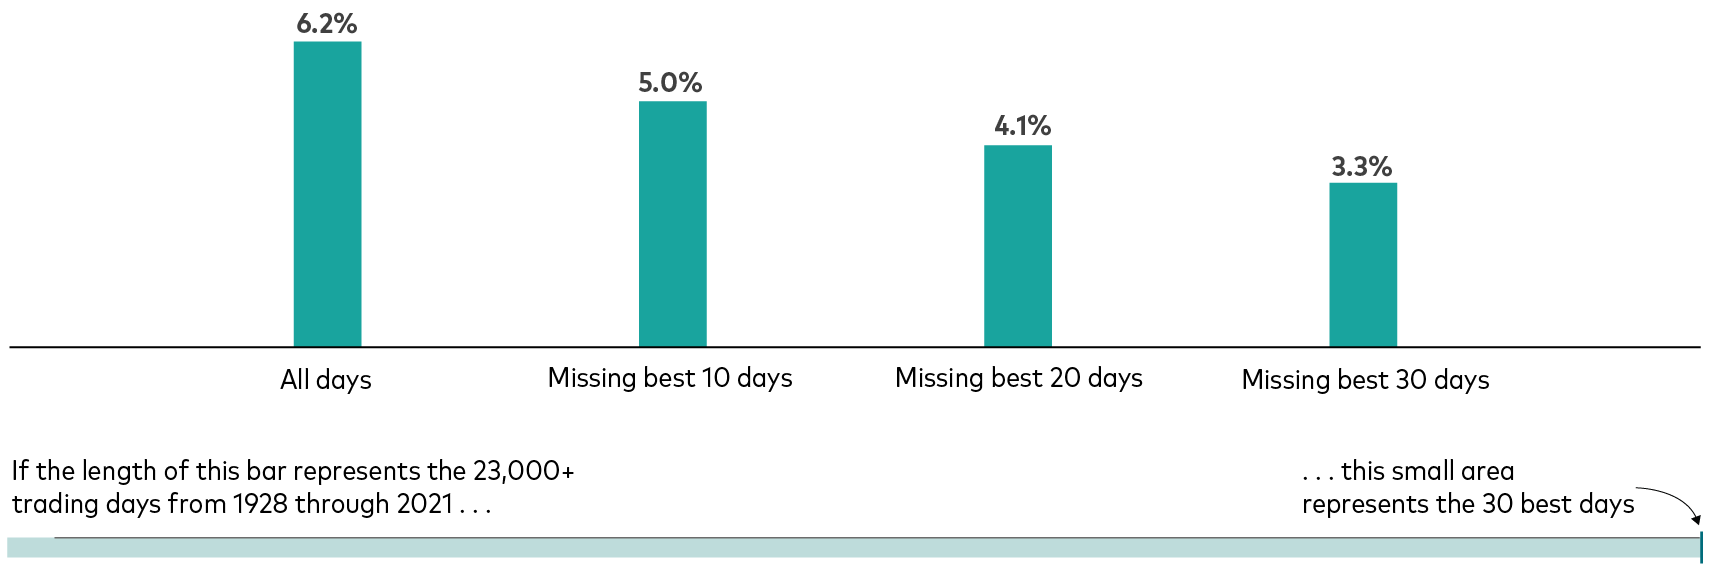 Hypothetical investors would have earned a 6.2% return for all the trading days from 1928 through 2021, a 5% return if they missed the 10 best trading days, a 4.1% return if they missed the 20 best trading days, and a 3.3% return if they missed the 30 best trading days.